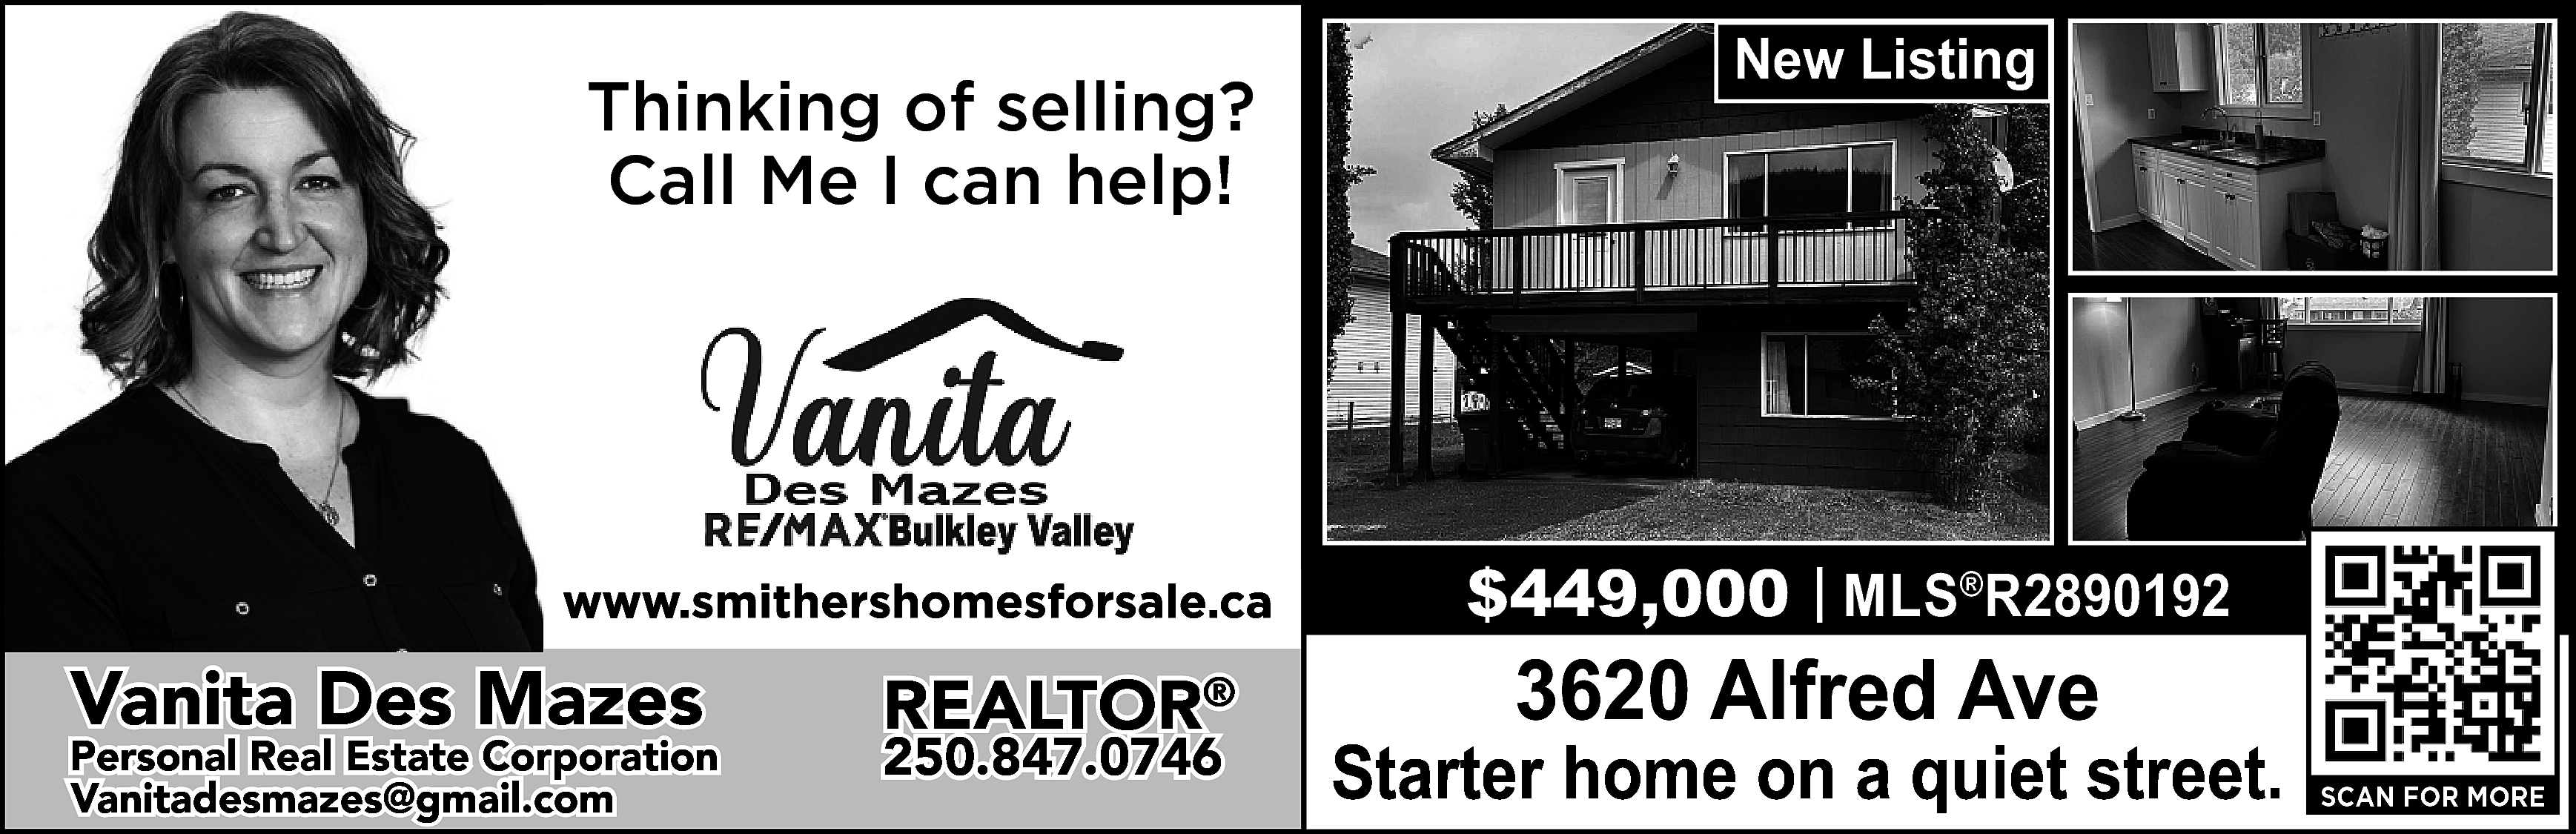 Thinking of selling? <br>Call Me  Thinking of selling?  Call Me I can help!    https://www.smithershomesforsale.ca/    Vanita Des Mazes    Personal Real Estate Corporation  vanitadesmazes@gmail.com  Vanitadesmazes@gmail.com    REALTOR®  250.847.0746    New Listing    $449,000 | MLS®R2890192    3620 Alfred Ave    Starter home on a quiet street.    SCAN FOR MORE    